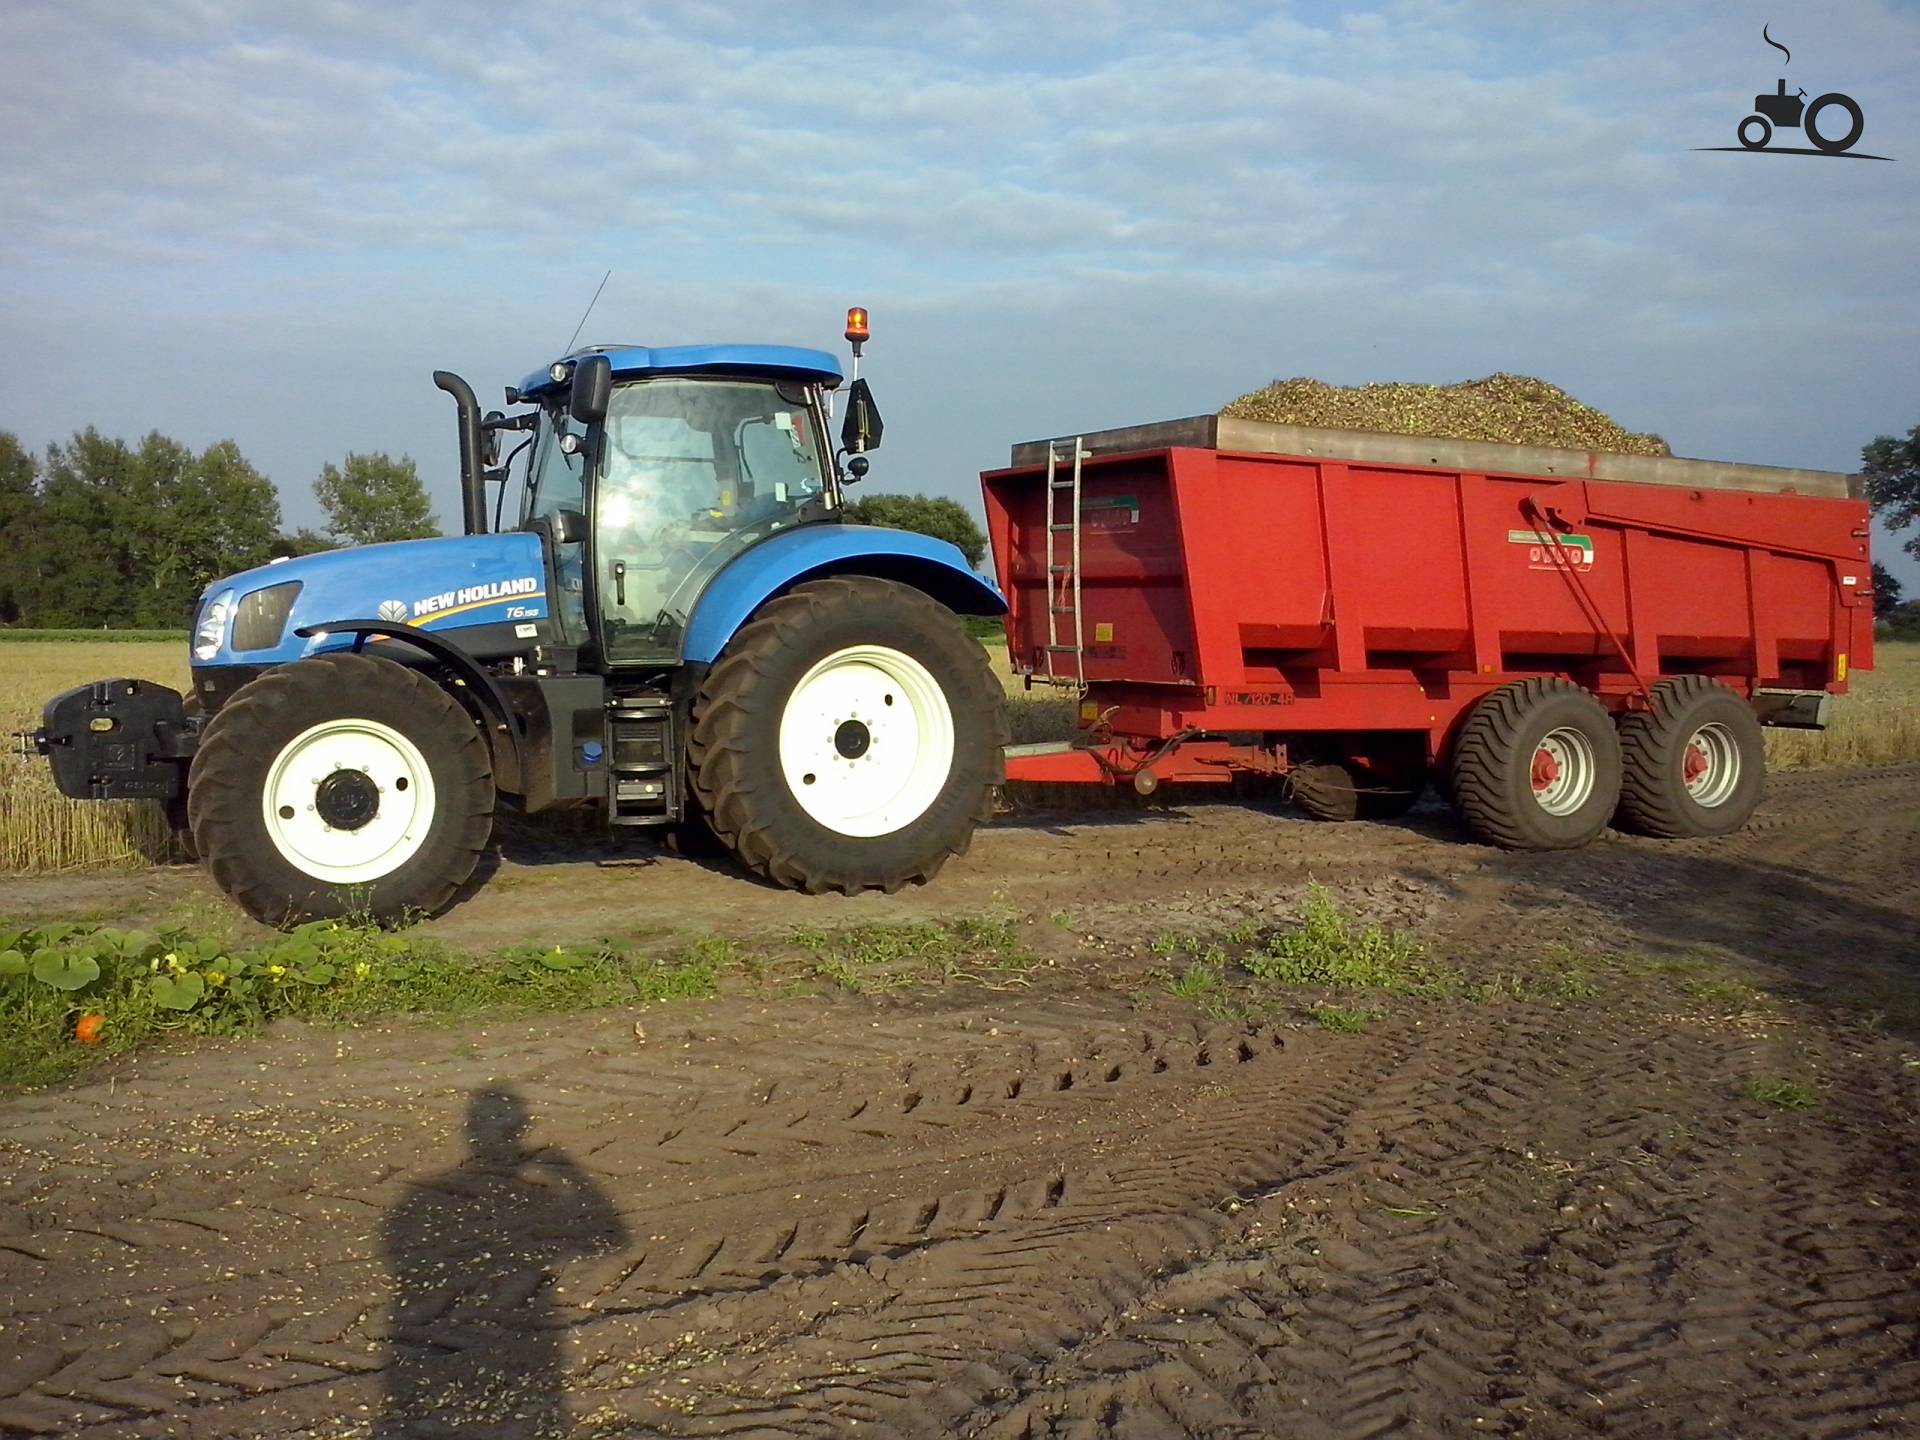 New Holland T 6.155